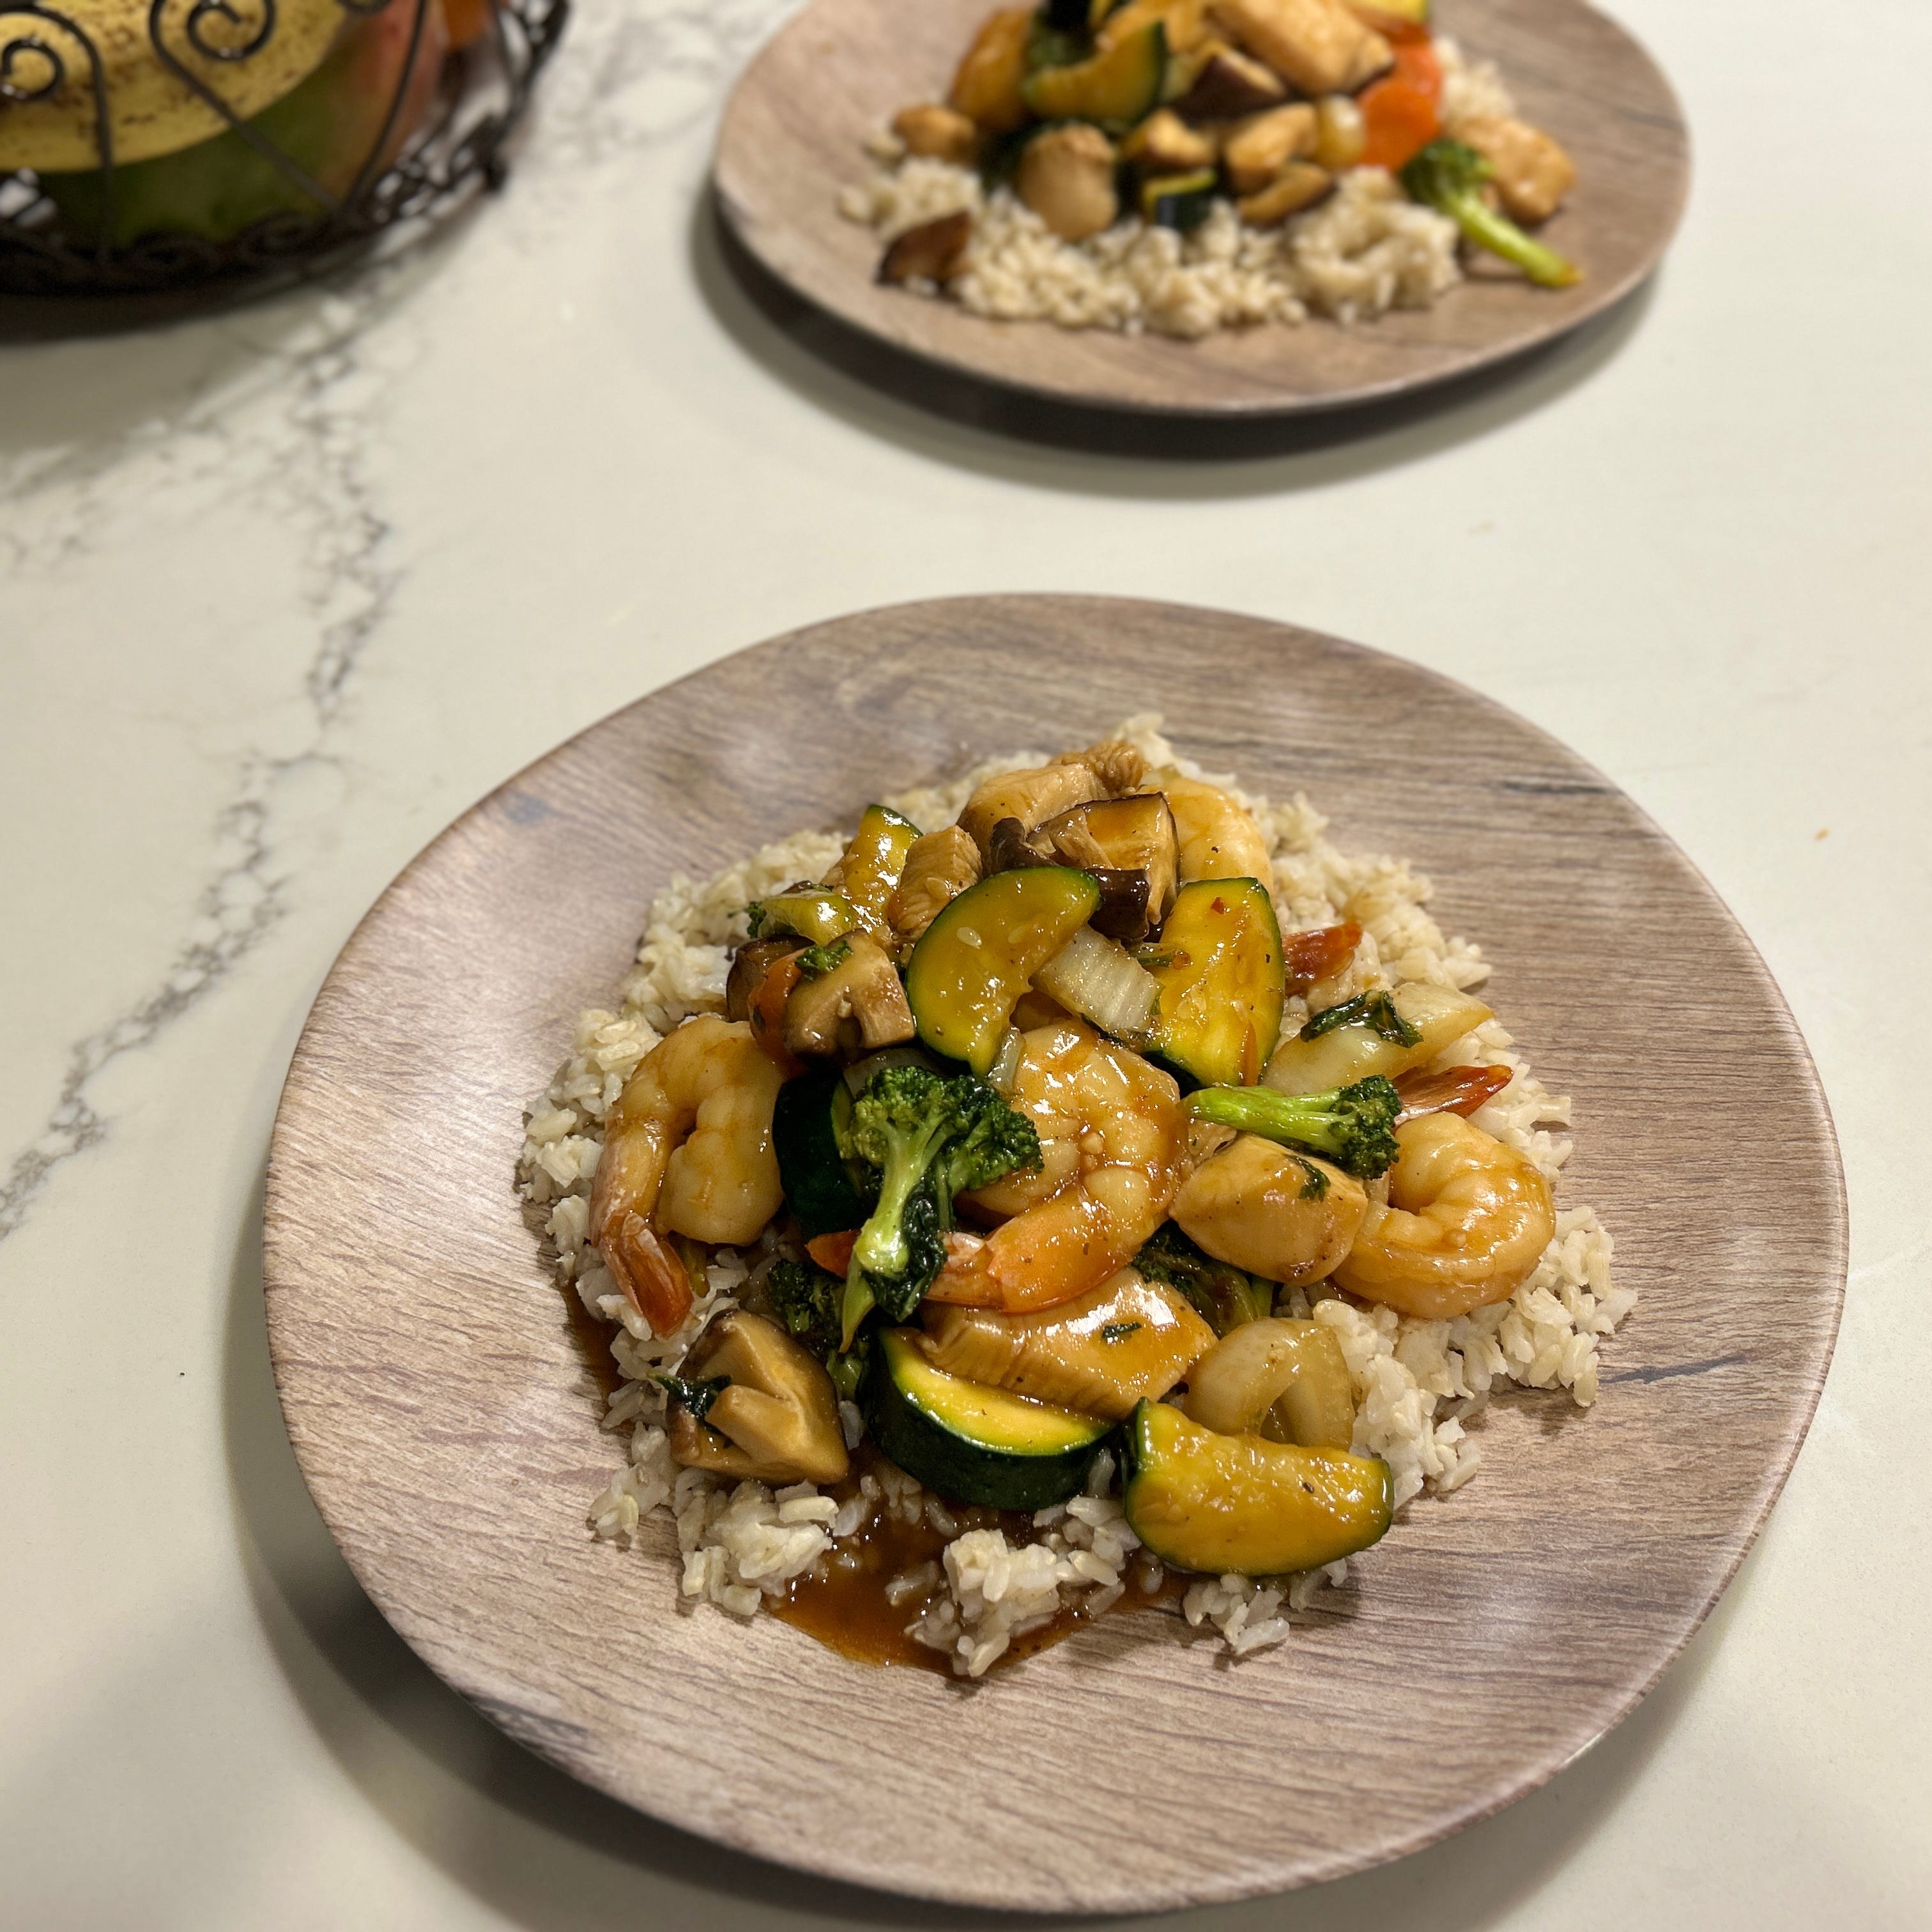 Chicken and Shrimp Stir Fry with Hearty Veggies over Brown Rice